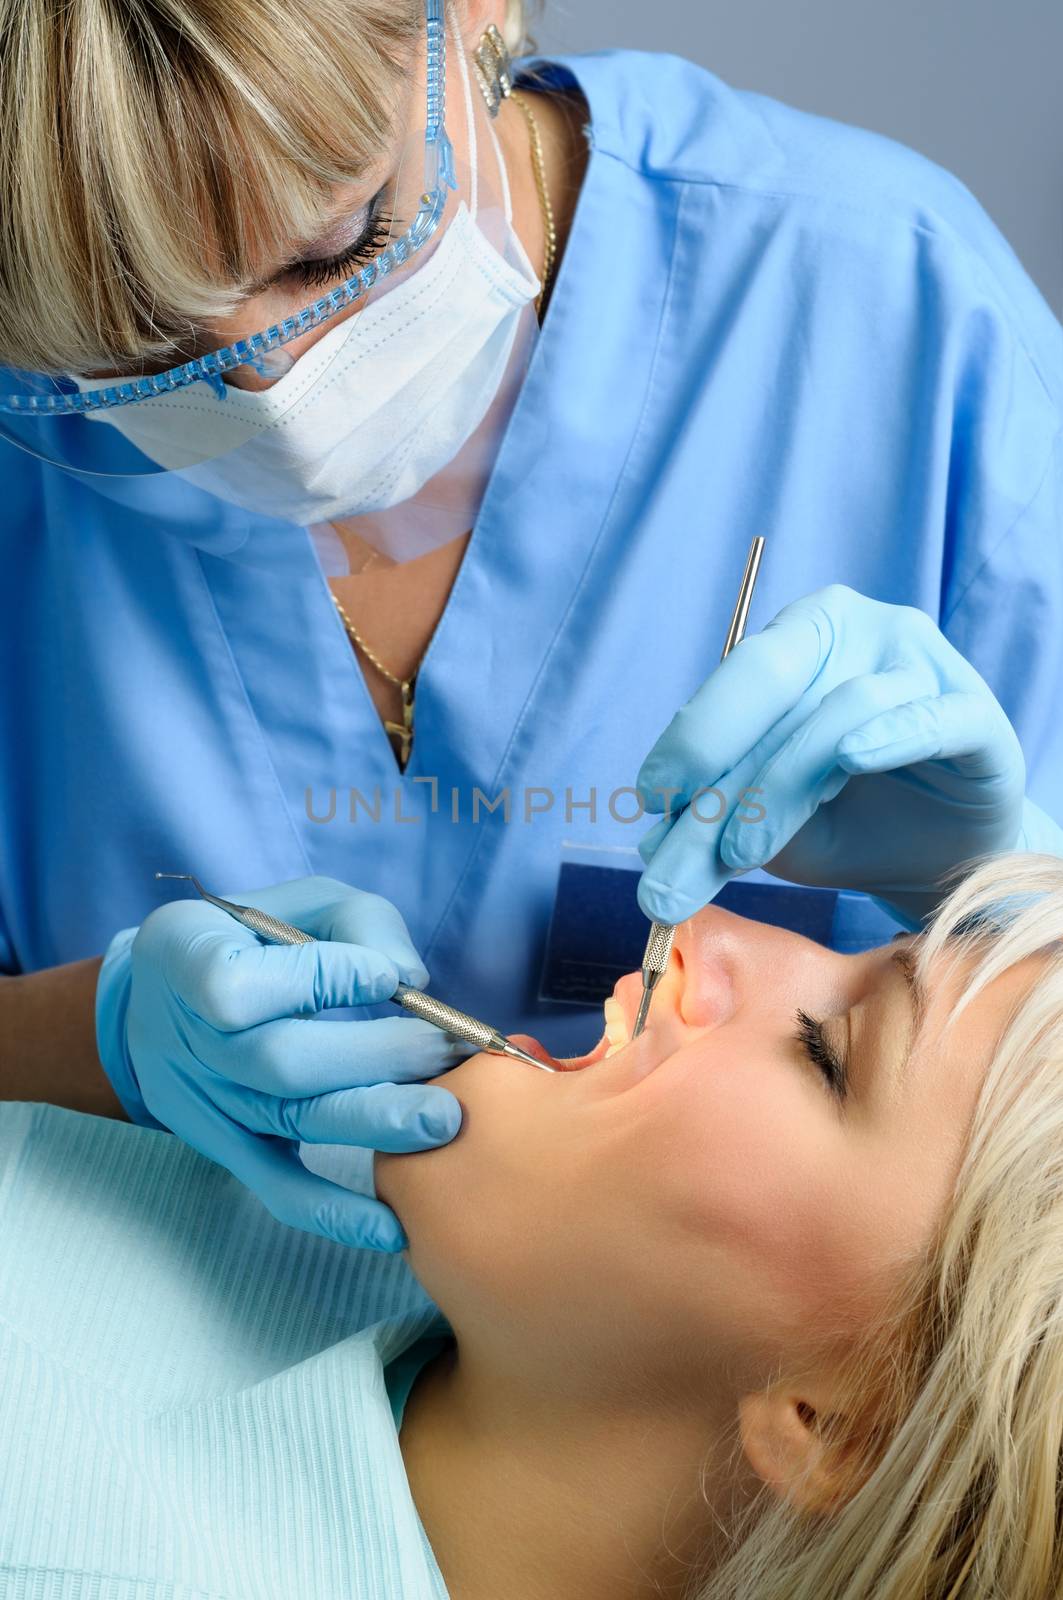 dentist at work with patient, dental exam and calcucus removal